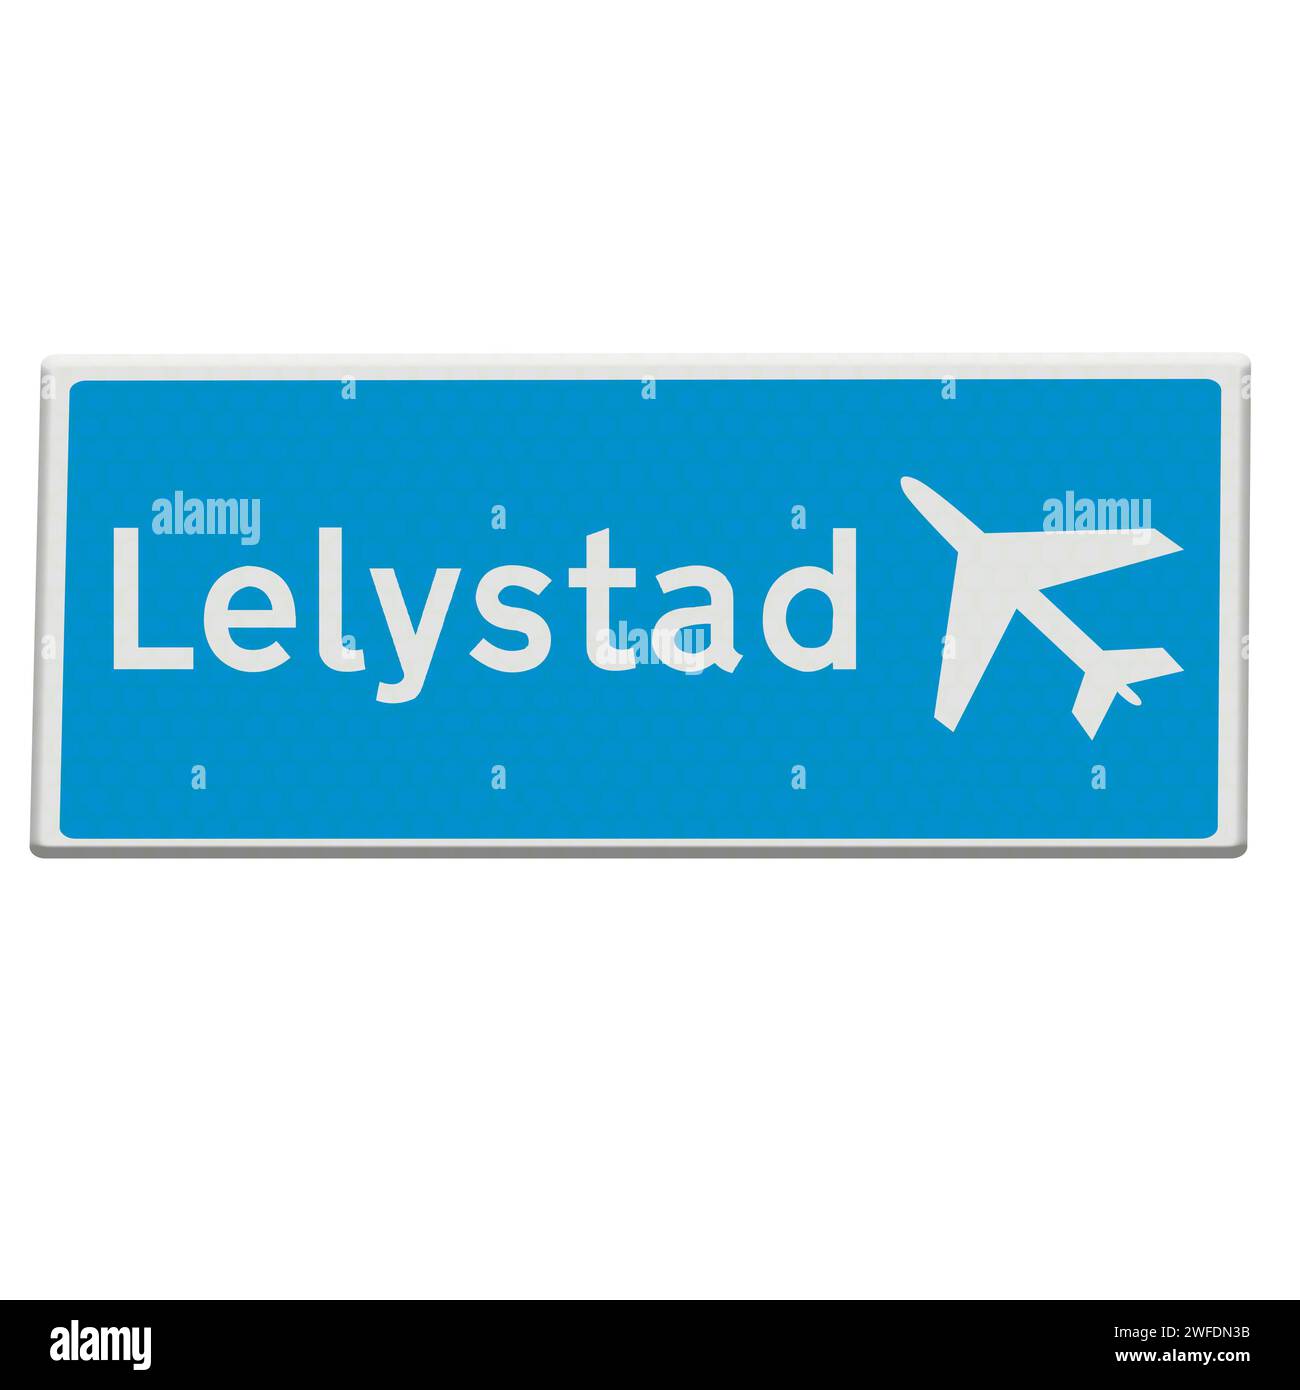 Amsterdam The Netherlands 30th January 2024 Digital illustration - Road sign for Lelystad airport. Today a majority of the lower house of the Dutch parliament voted for a motion to stop plans for commercial aviation at Lelystad airport. The airport has long been a political hot potato with plans to open it to take holiday flights to relieve congestion at nearby Schiphol. Stock Photo